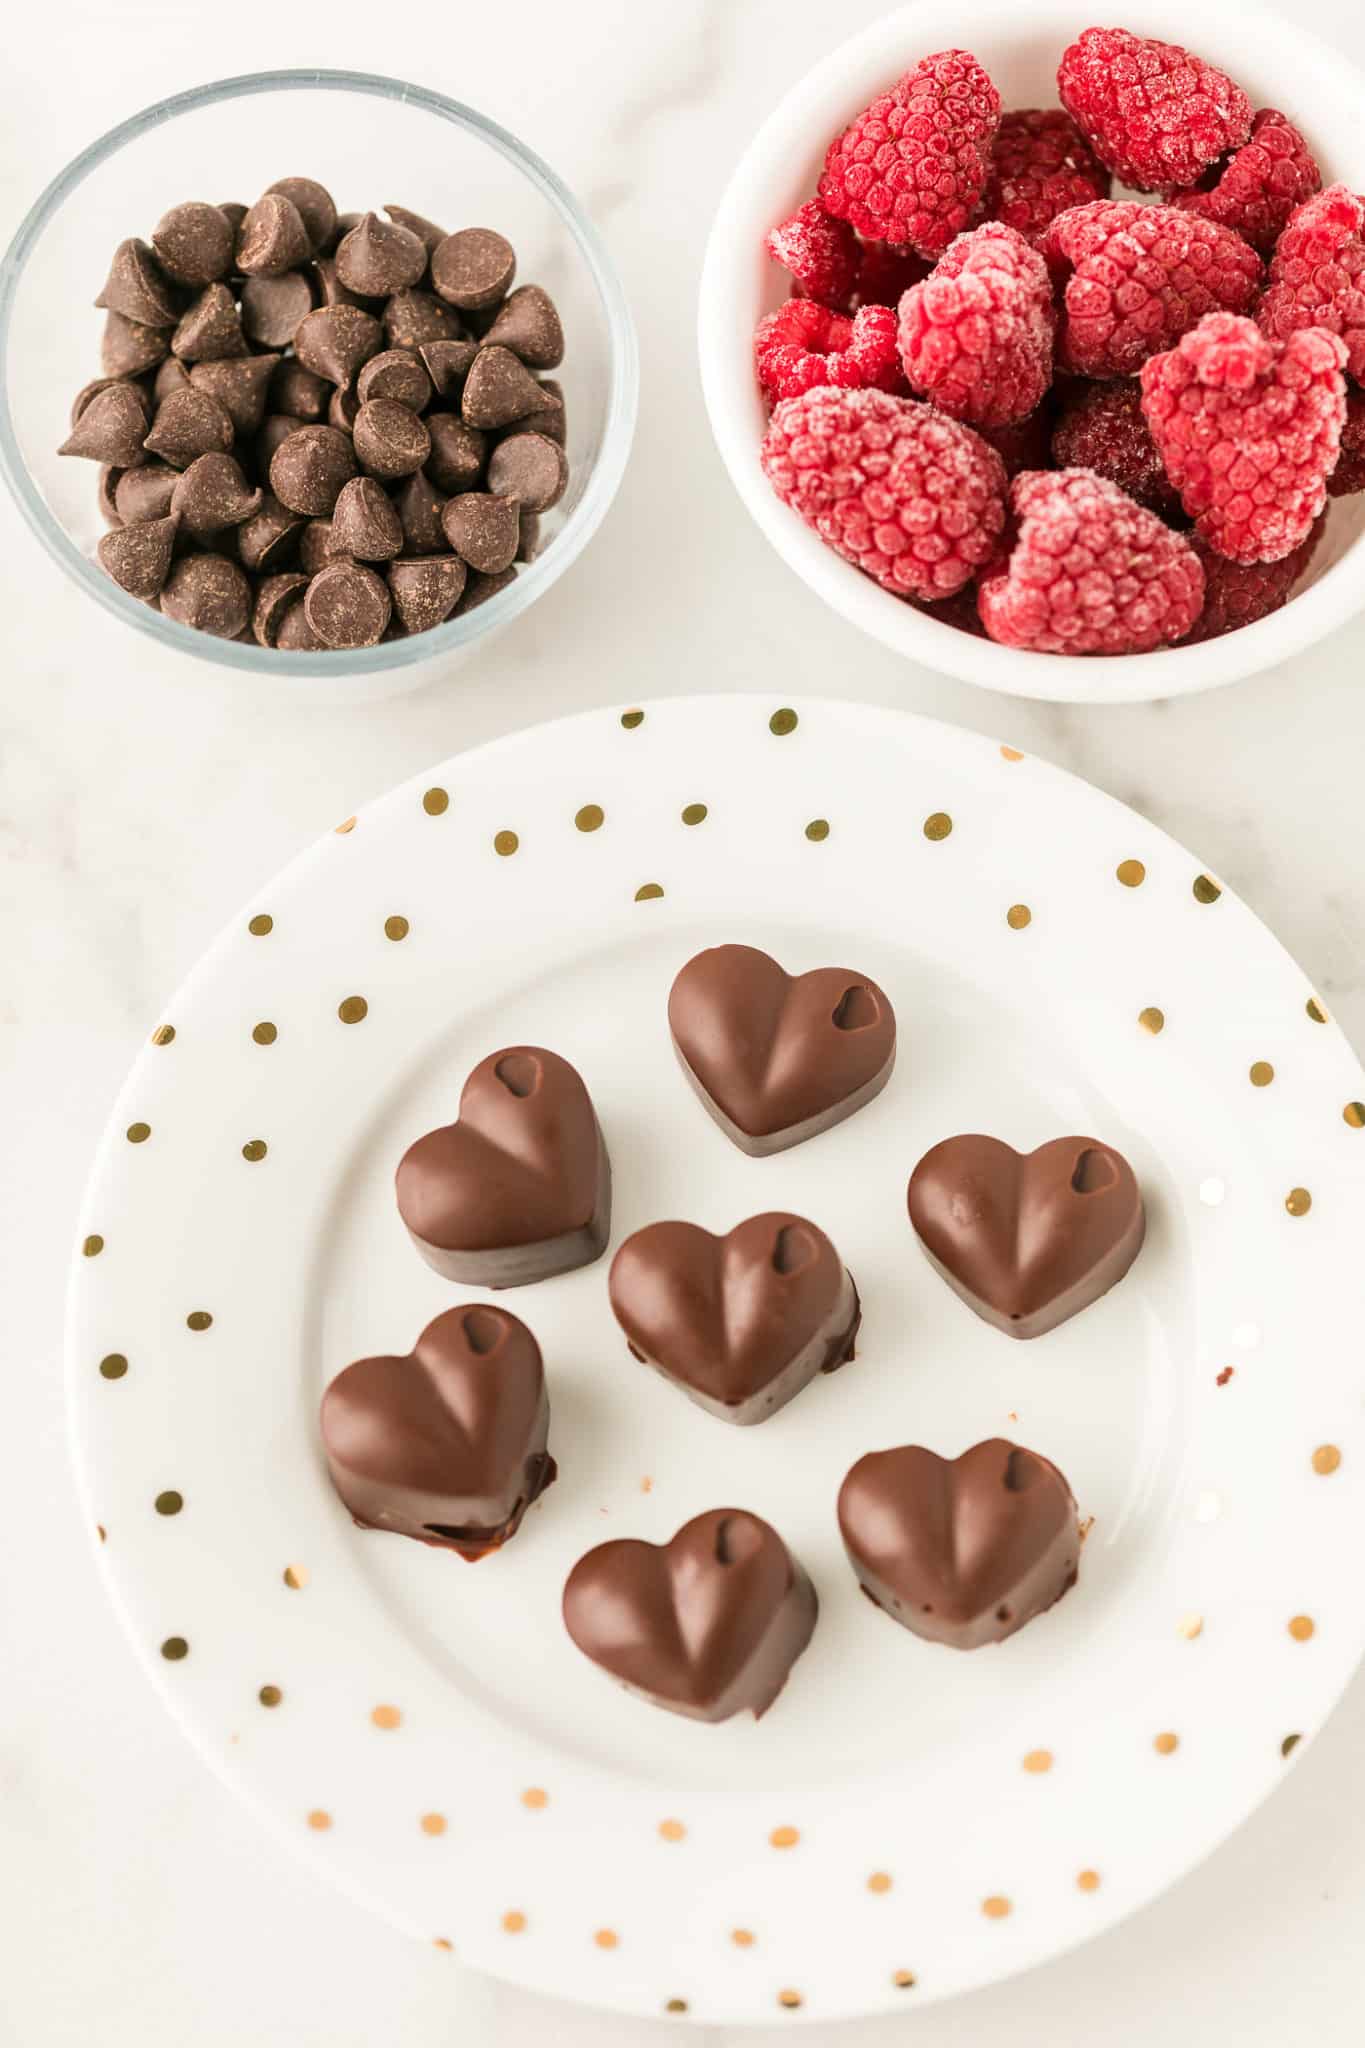 chocolate hearts on a plate next to a bowl of chocolate chips and a bowl of frozen raspberries